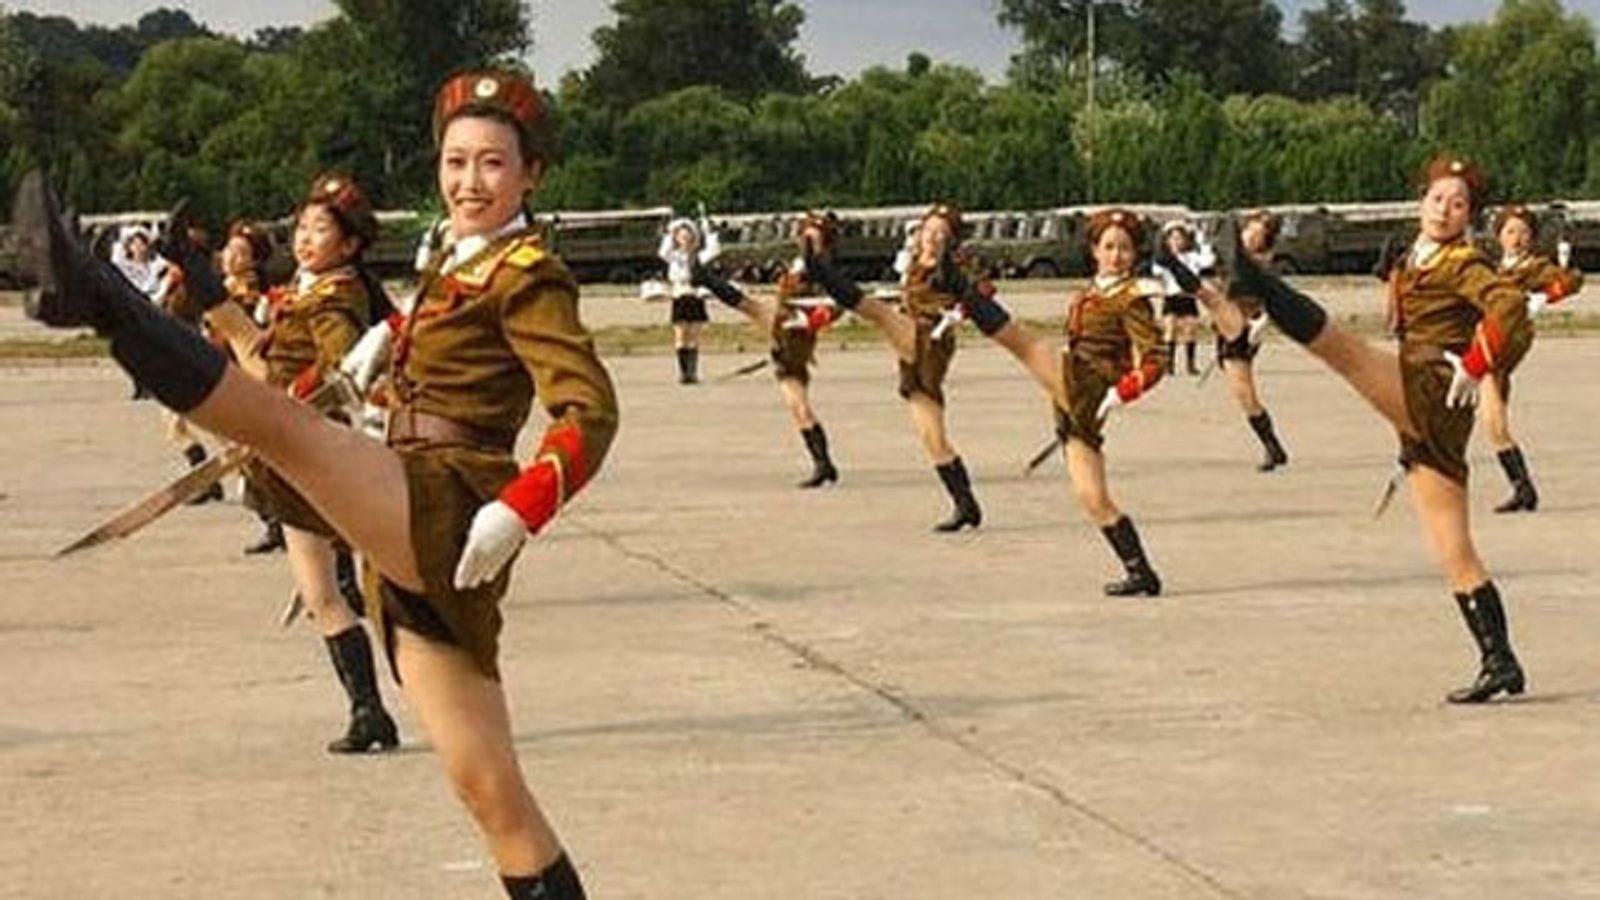 Porn, Poop Sell like Hot Cakes in North Korea